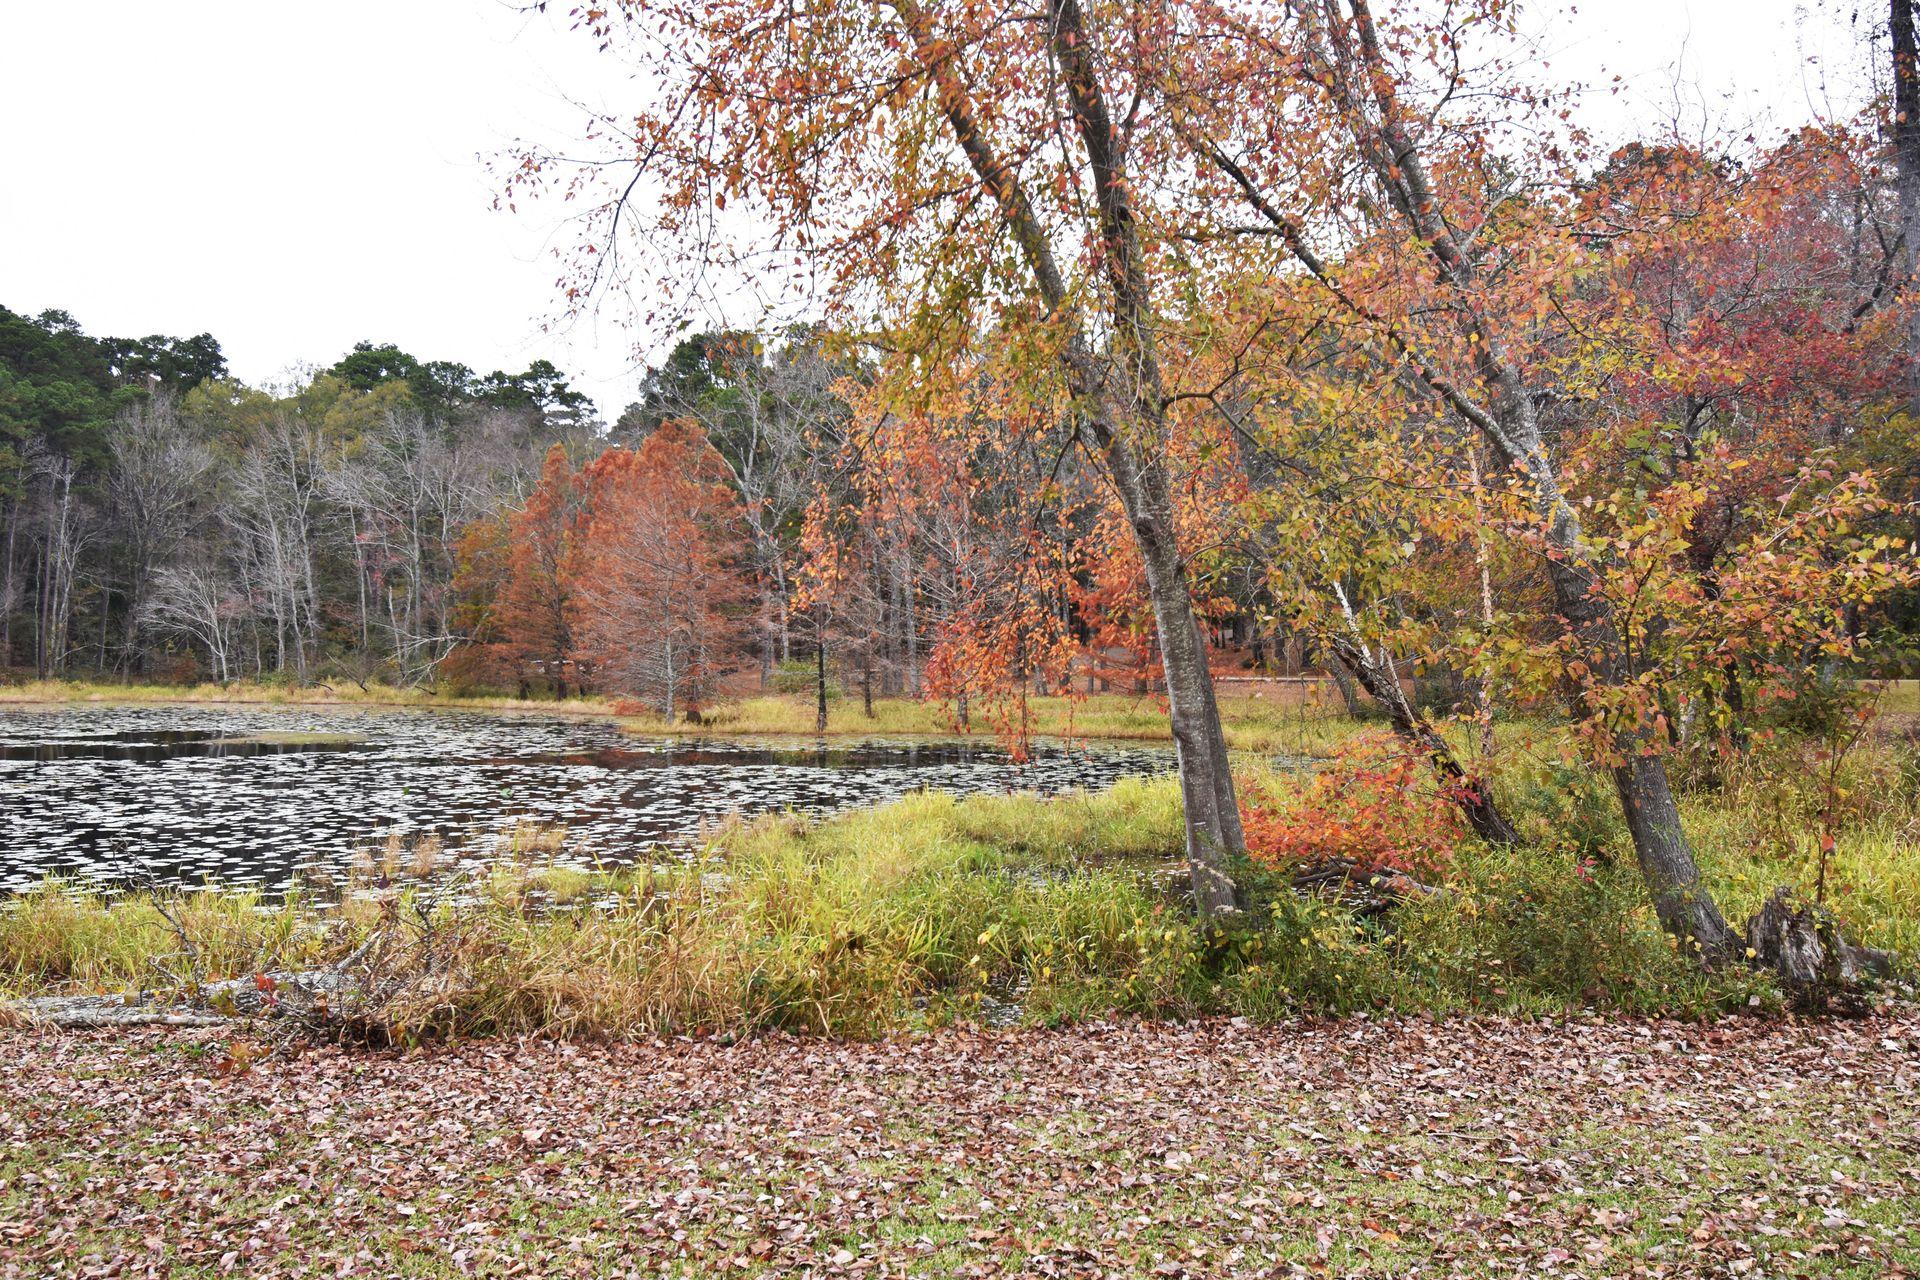 A lake surrounded by colorful fall foliage in Daingerfield State Park.